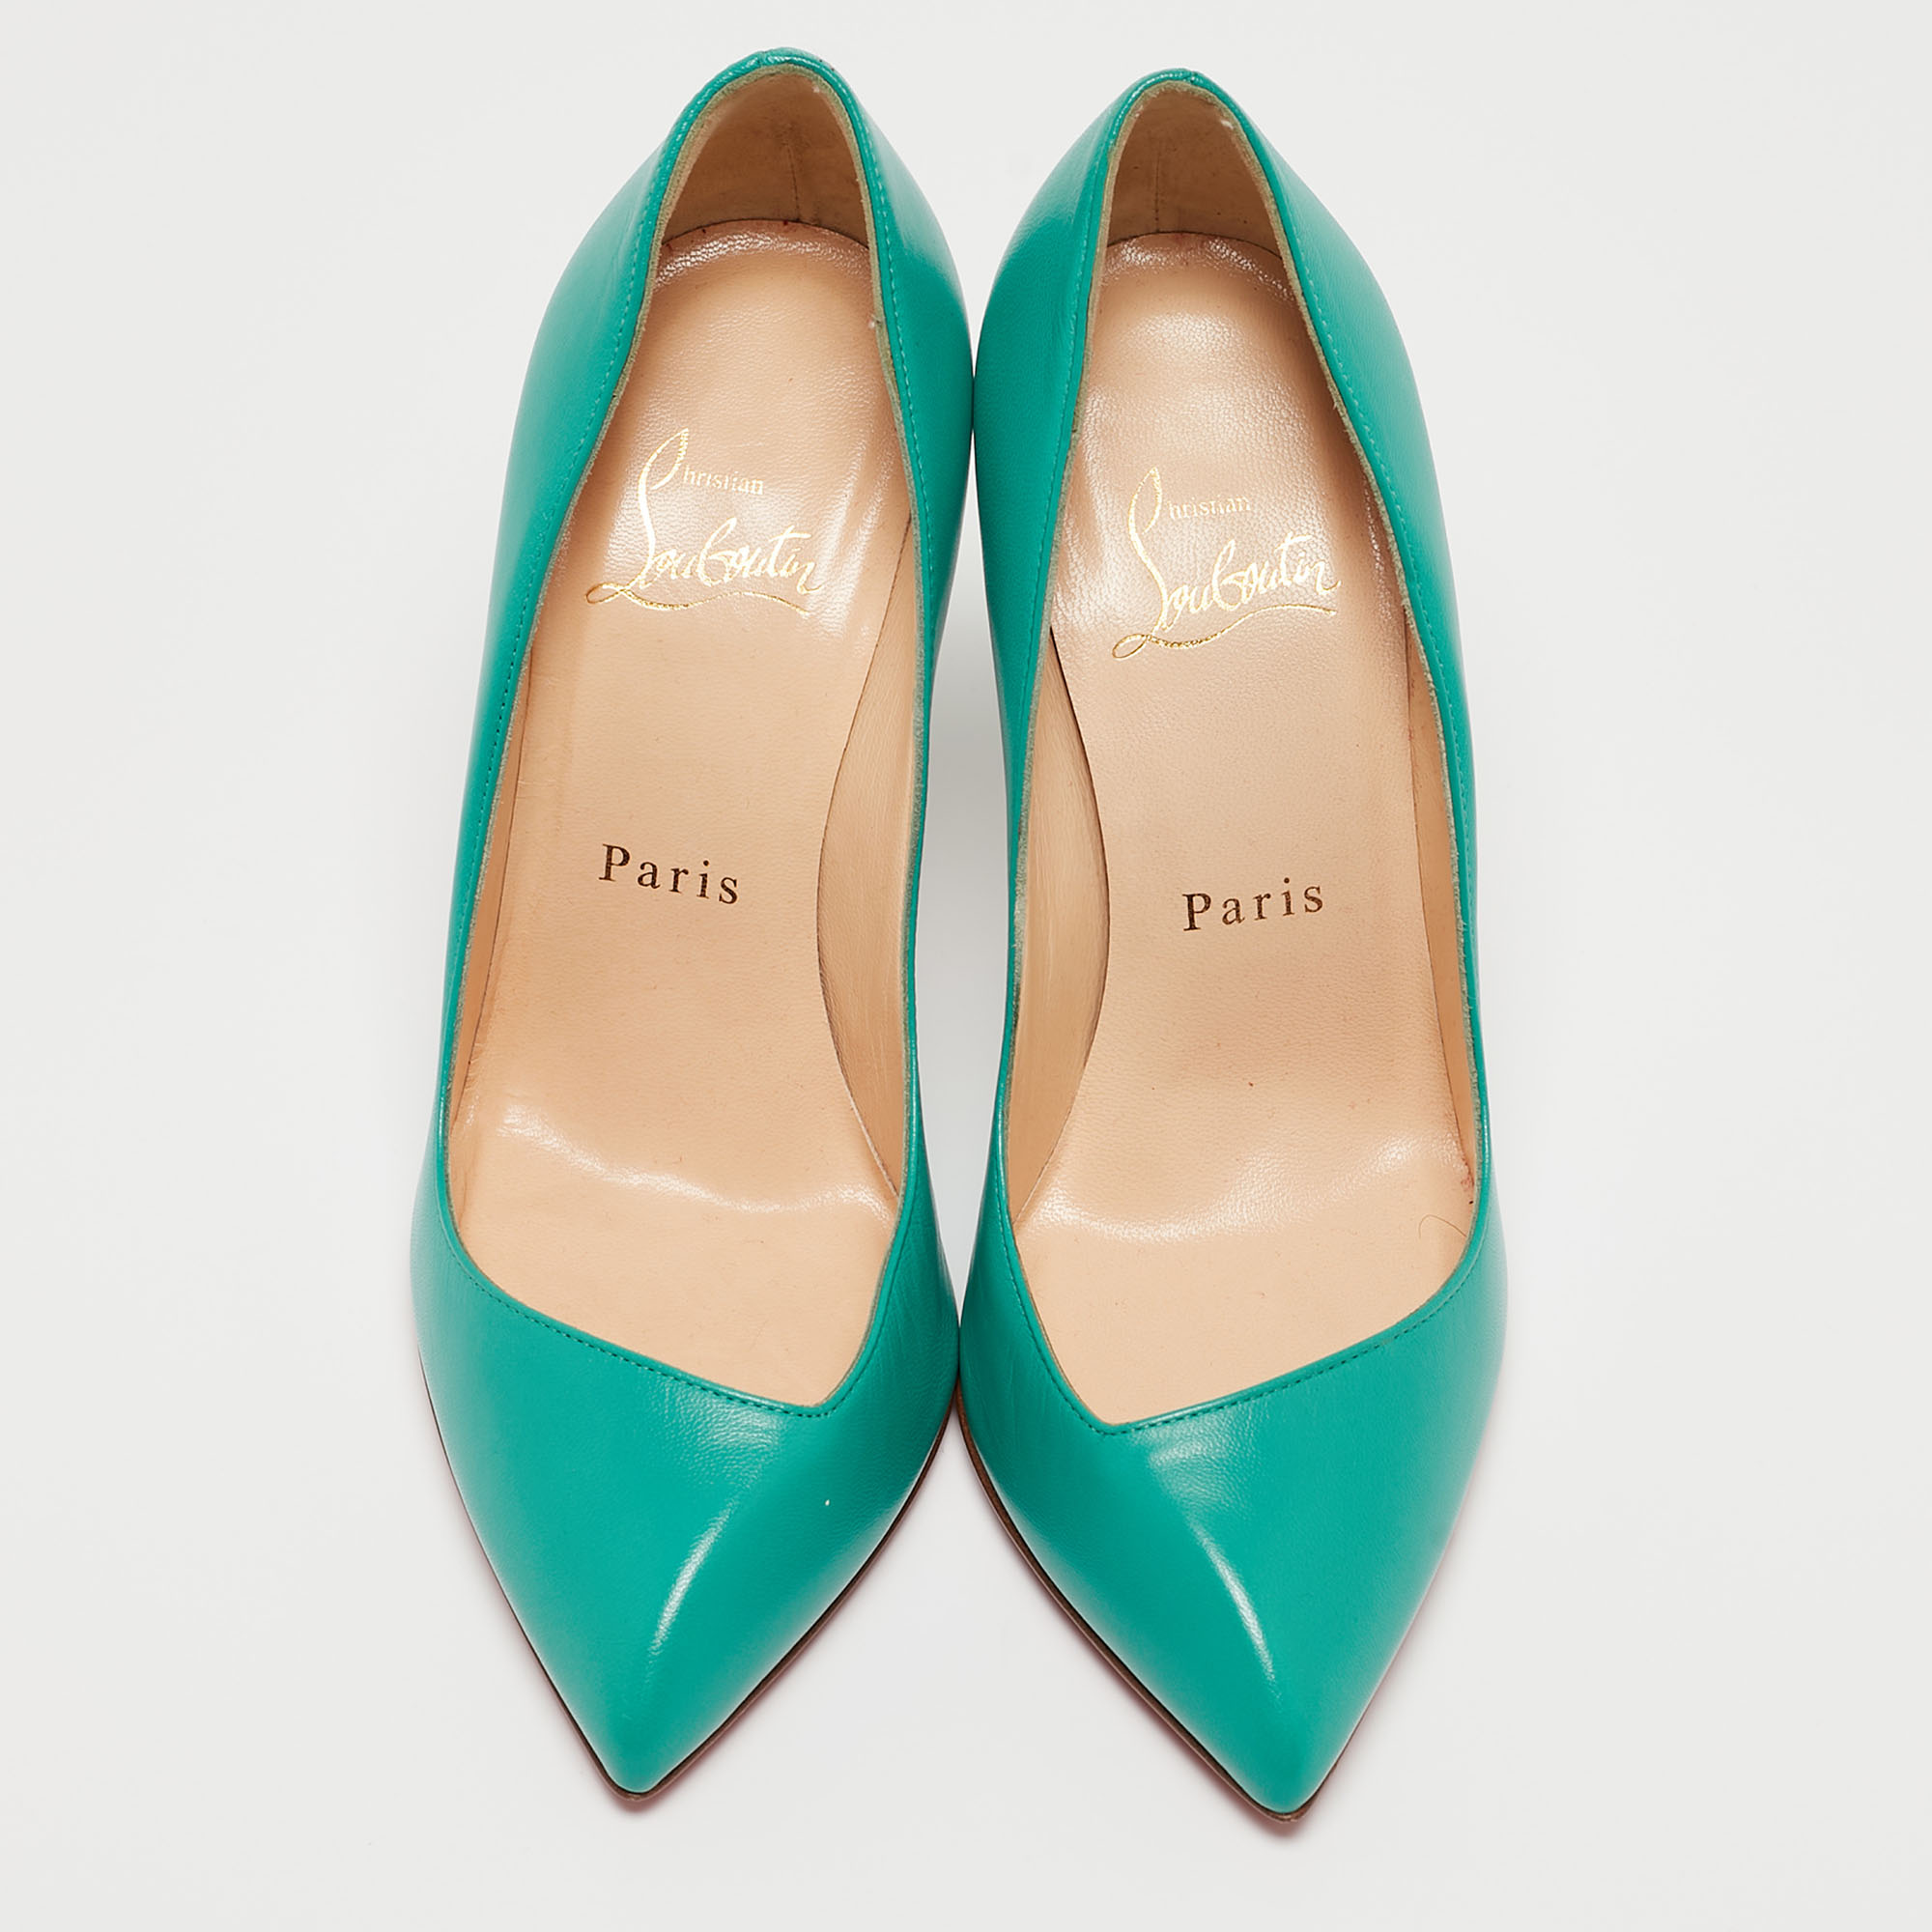 Christian Louboutin Green Leather Corneille Pumps Size 35